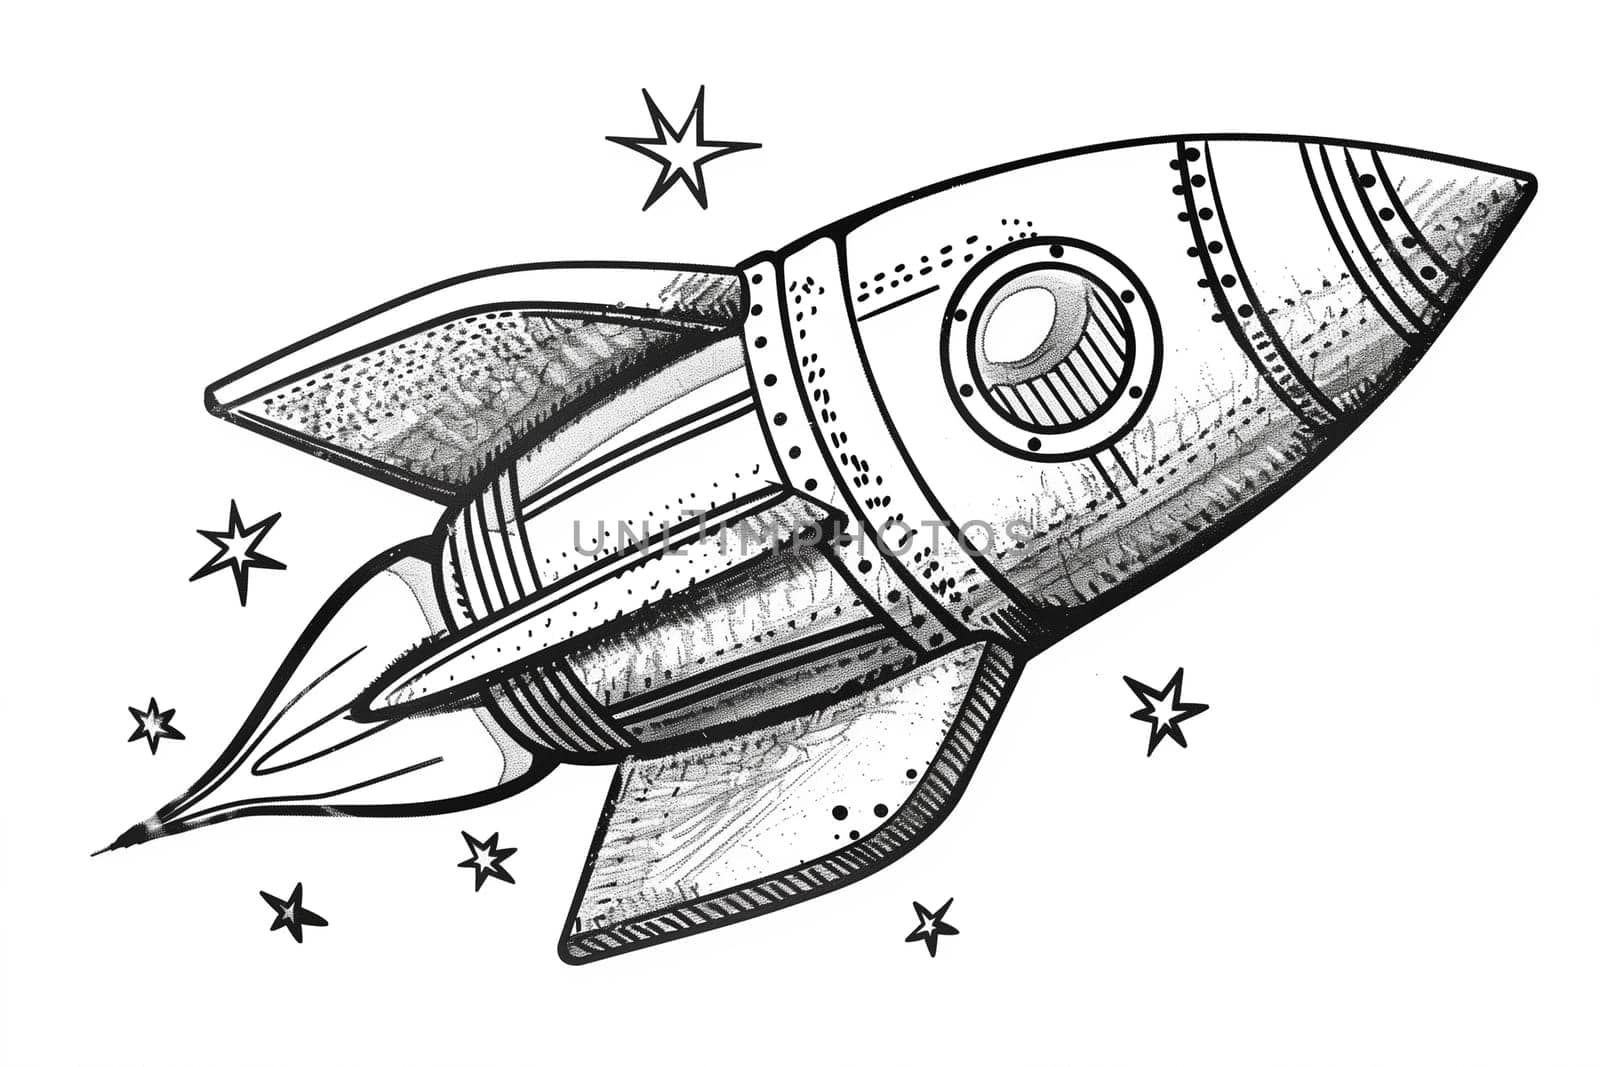 A monochromatic illustration of a rocket ship blasting off into space.